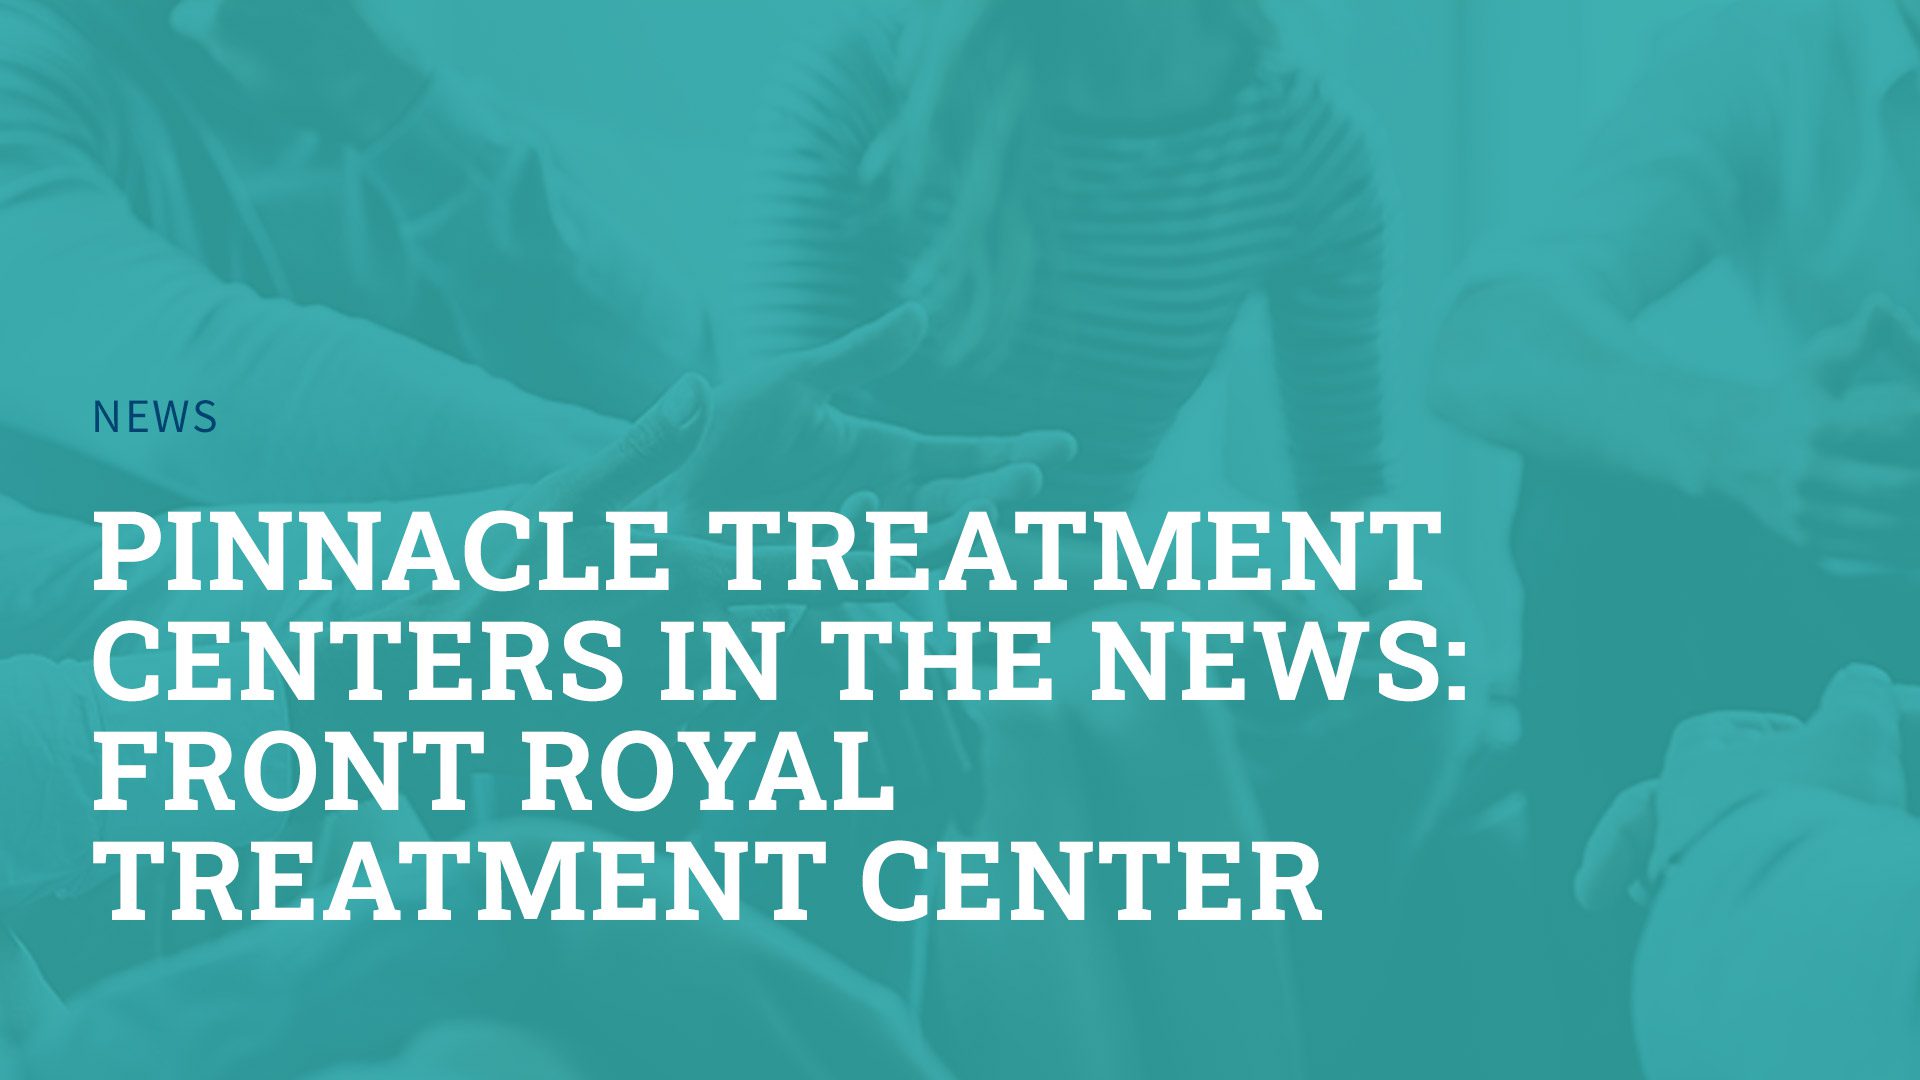 Pinnacle Treatment Centers in the News: Front Royal Treatment Center